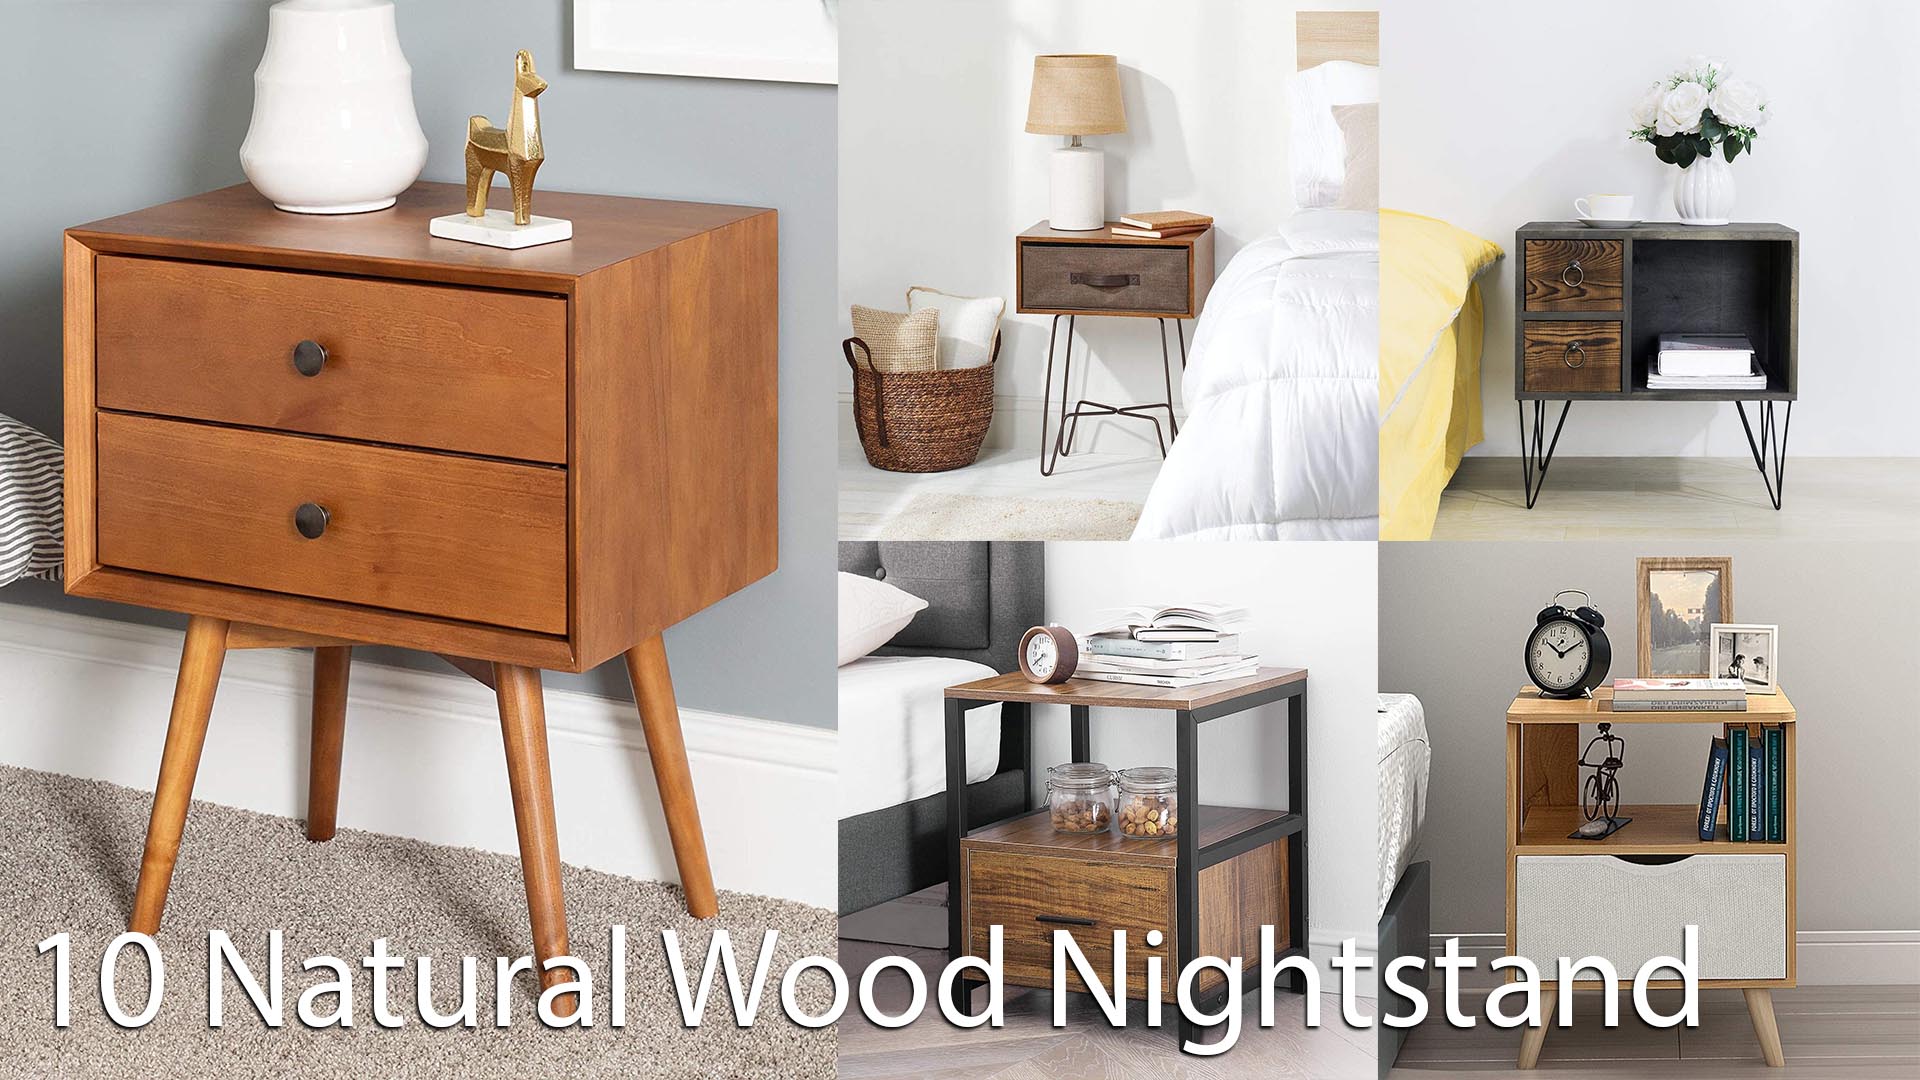 Best Natural Wood Nightstand for Your Home Decor